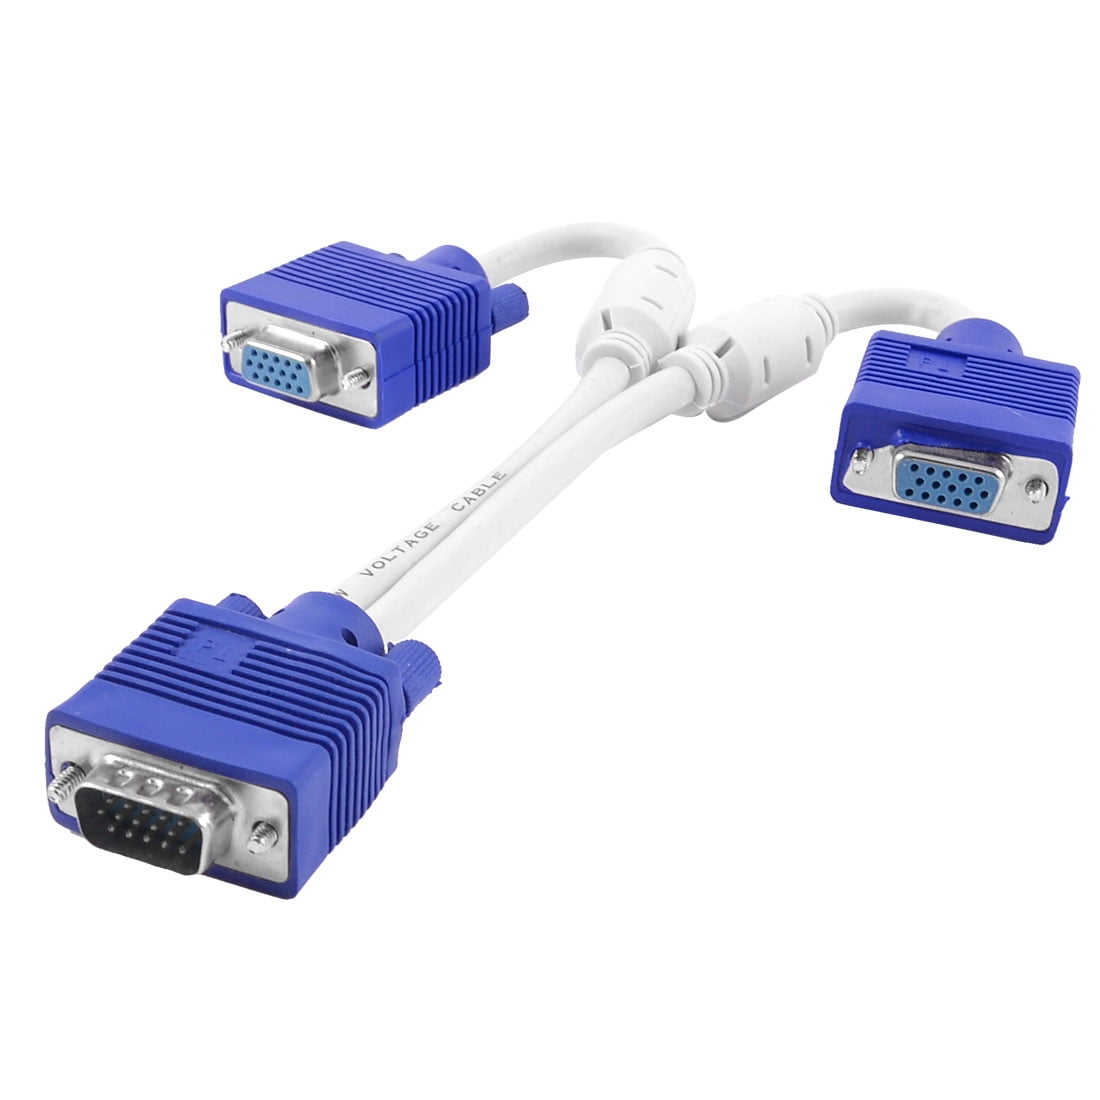 VGA Splitter Cable 1 Computer to Dual 2 Monitor Male to Female Adapter Wire #EB